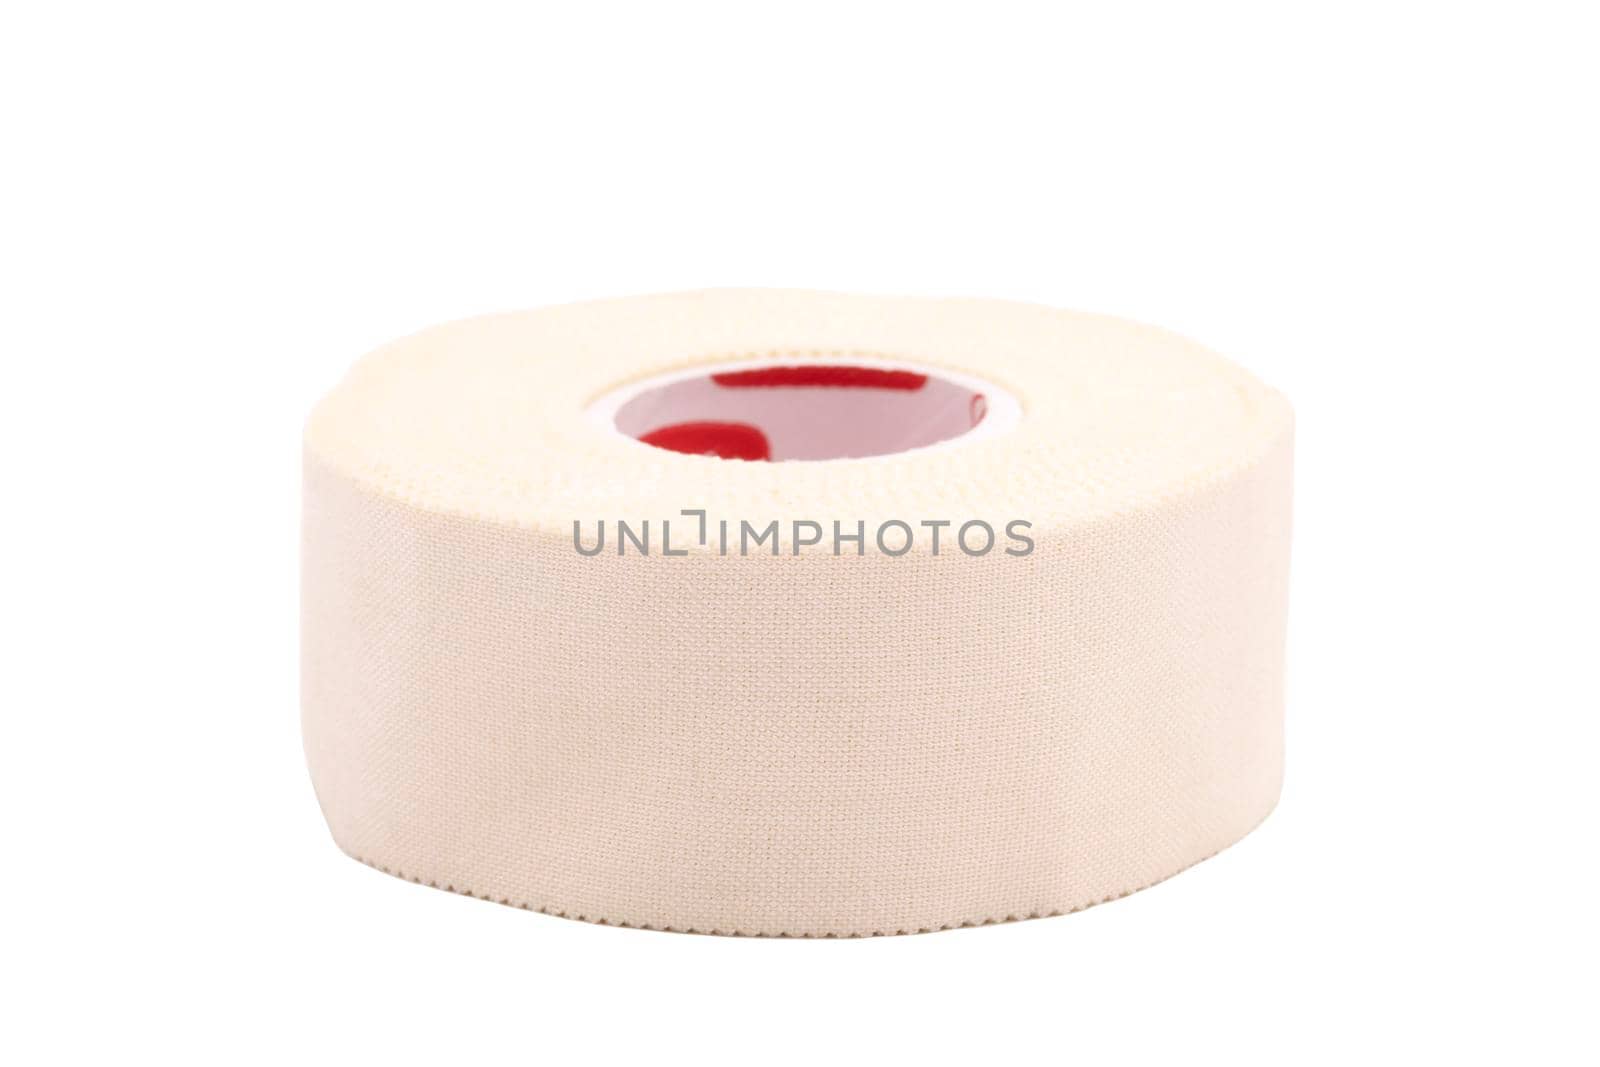 Medical bandage roll isolated on white background by drpnncpp